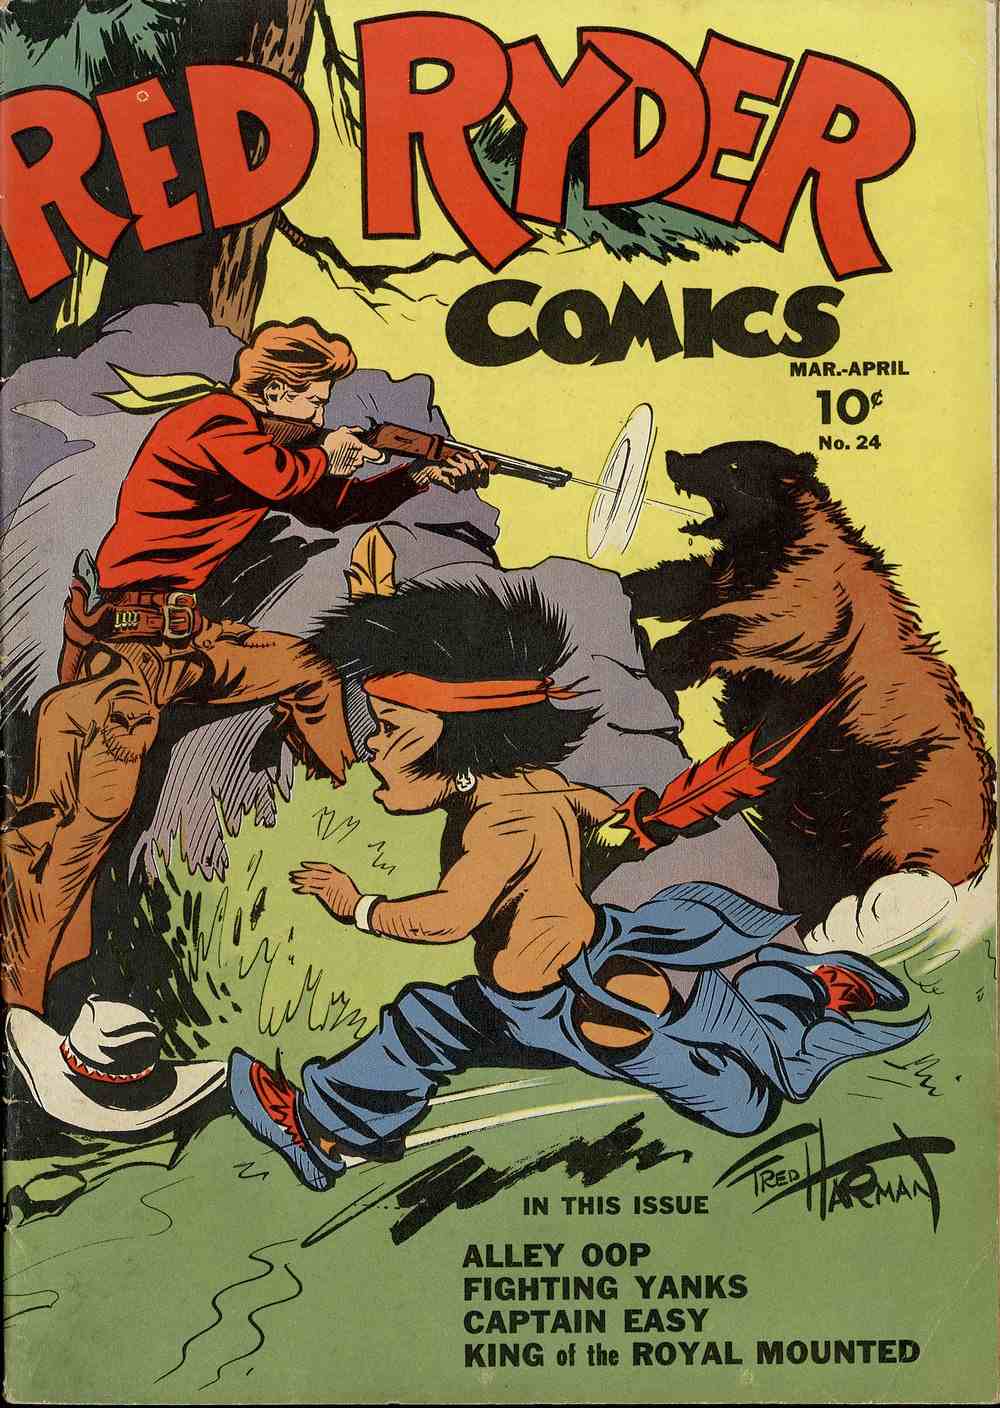 Book Cover For Red Ryder Comics 24